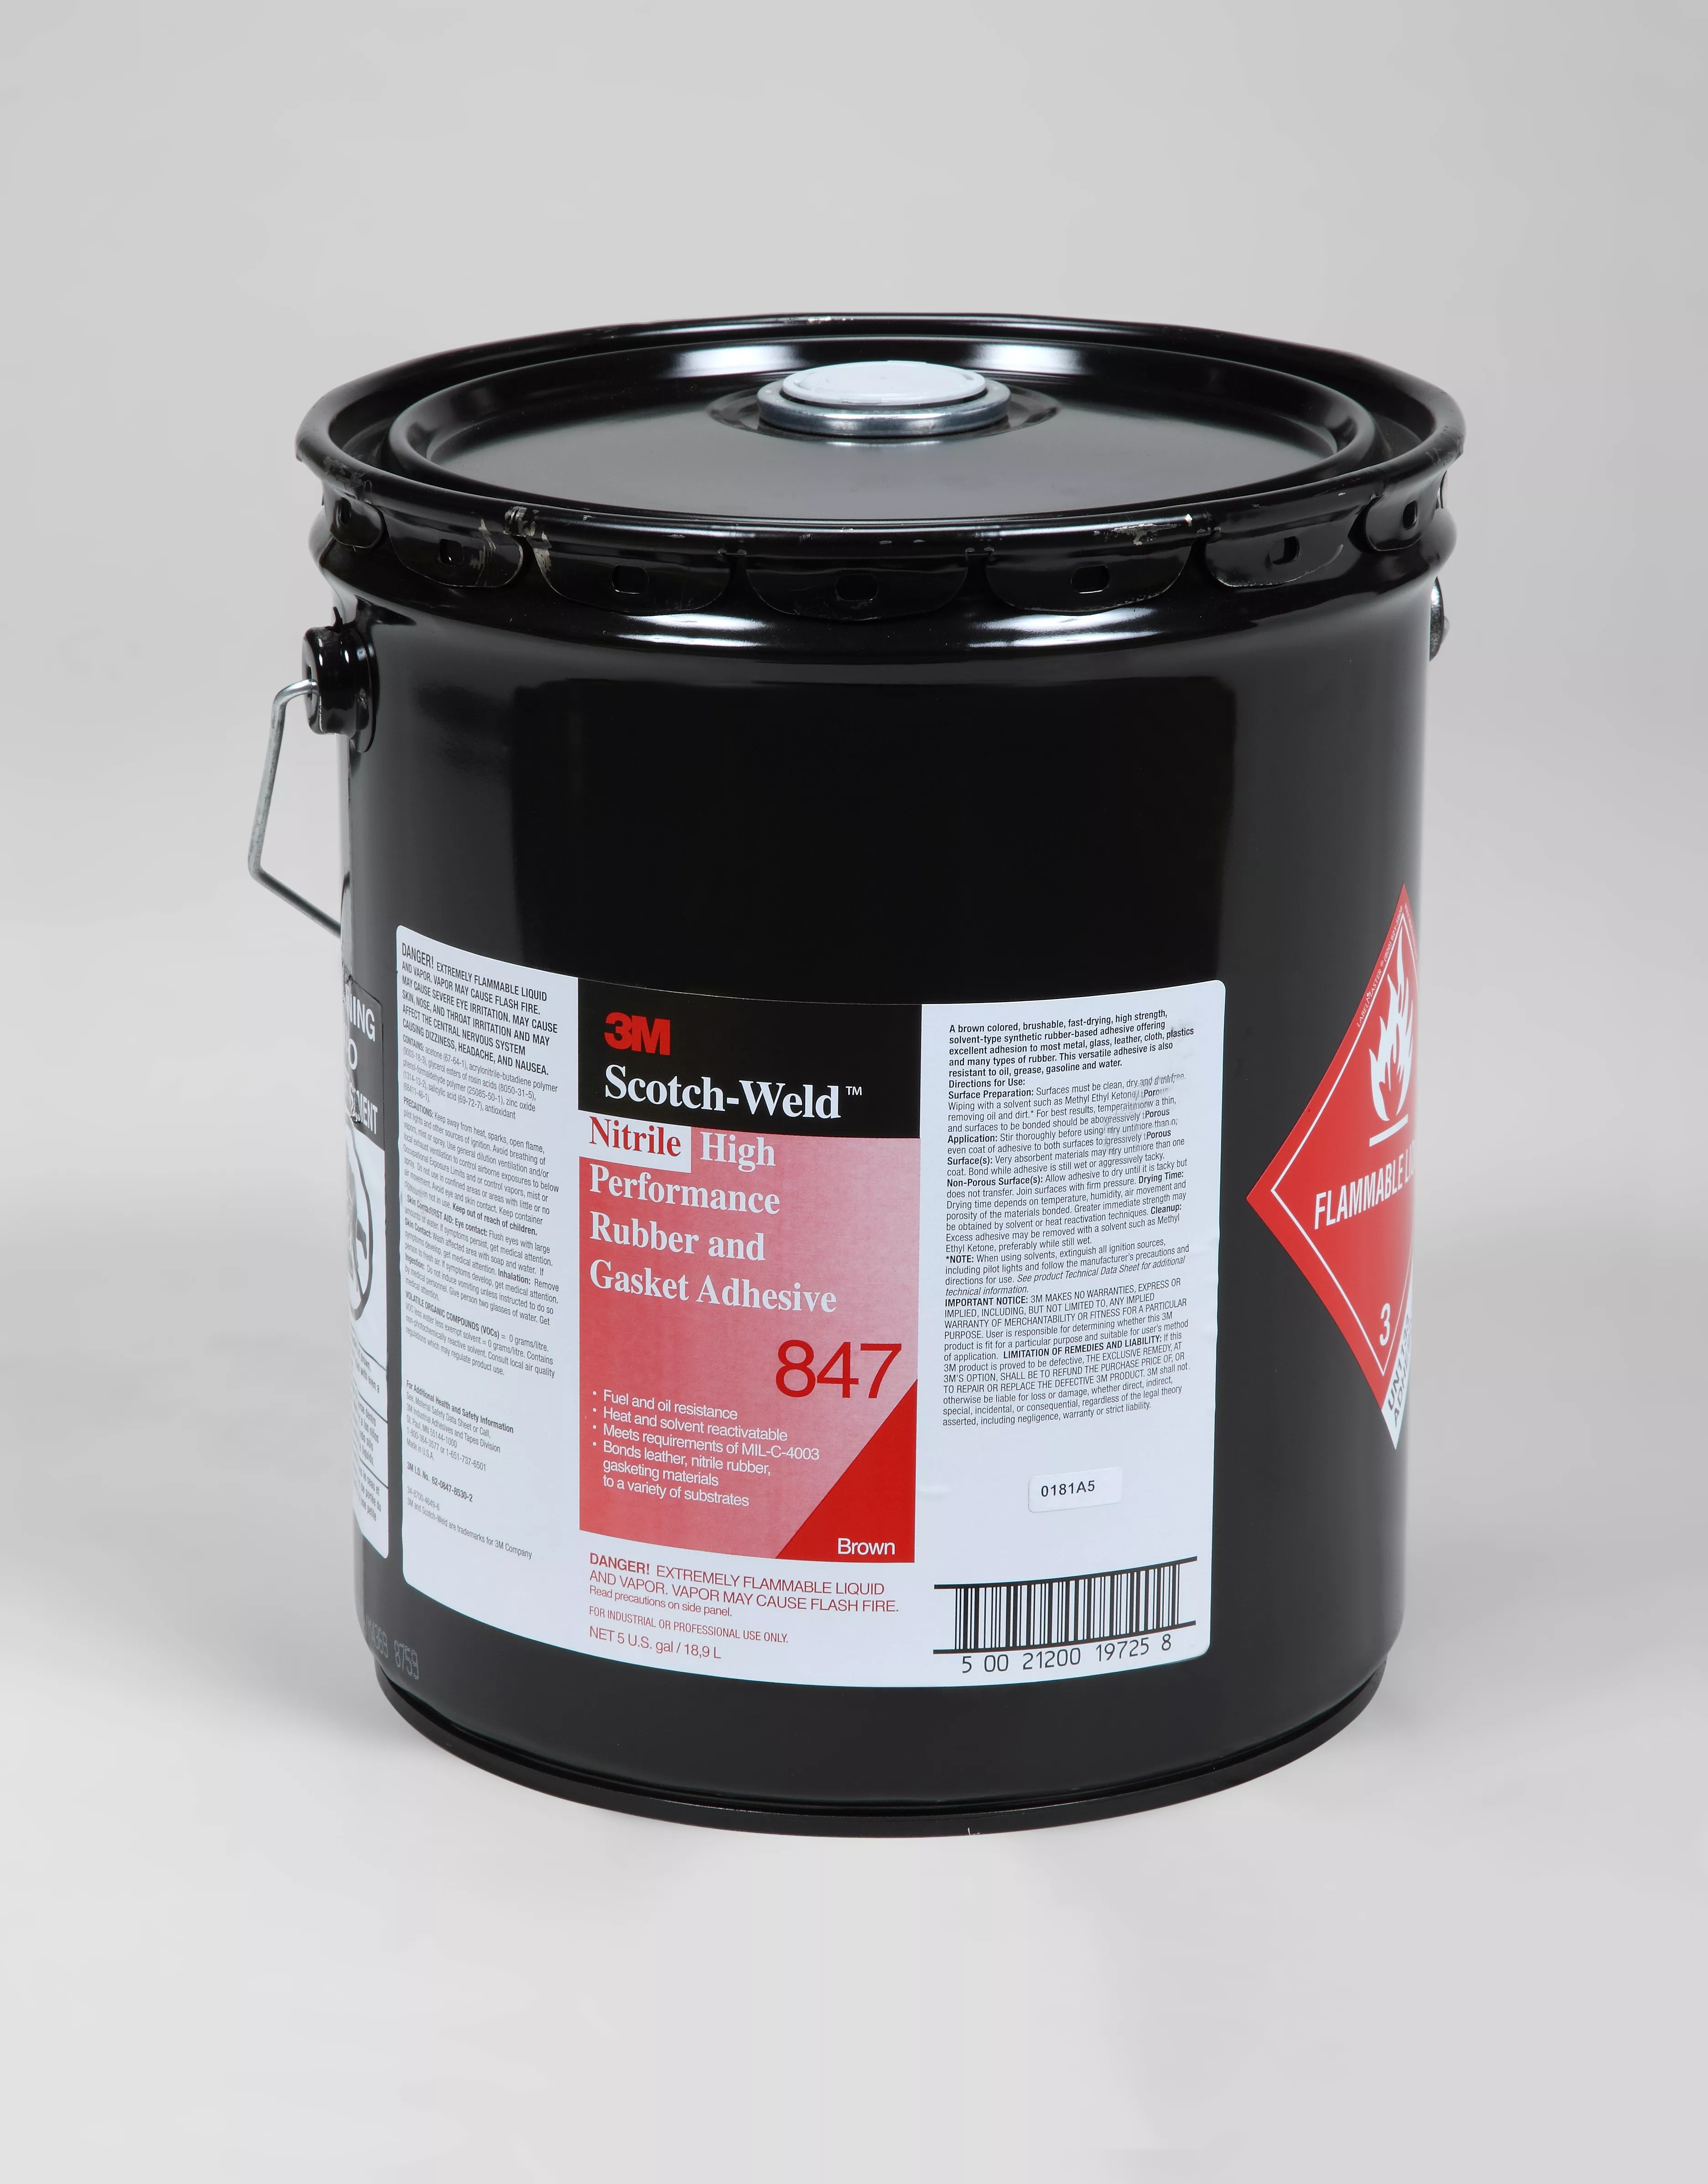 3M™ Nitrile High Performance Rubber and Gasket Adhesive 847, Brown, 5
Gallon (Pail), 1 Can/Drum